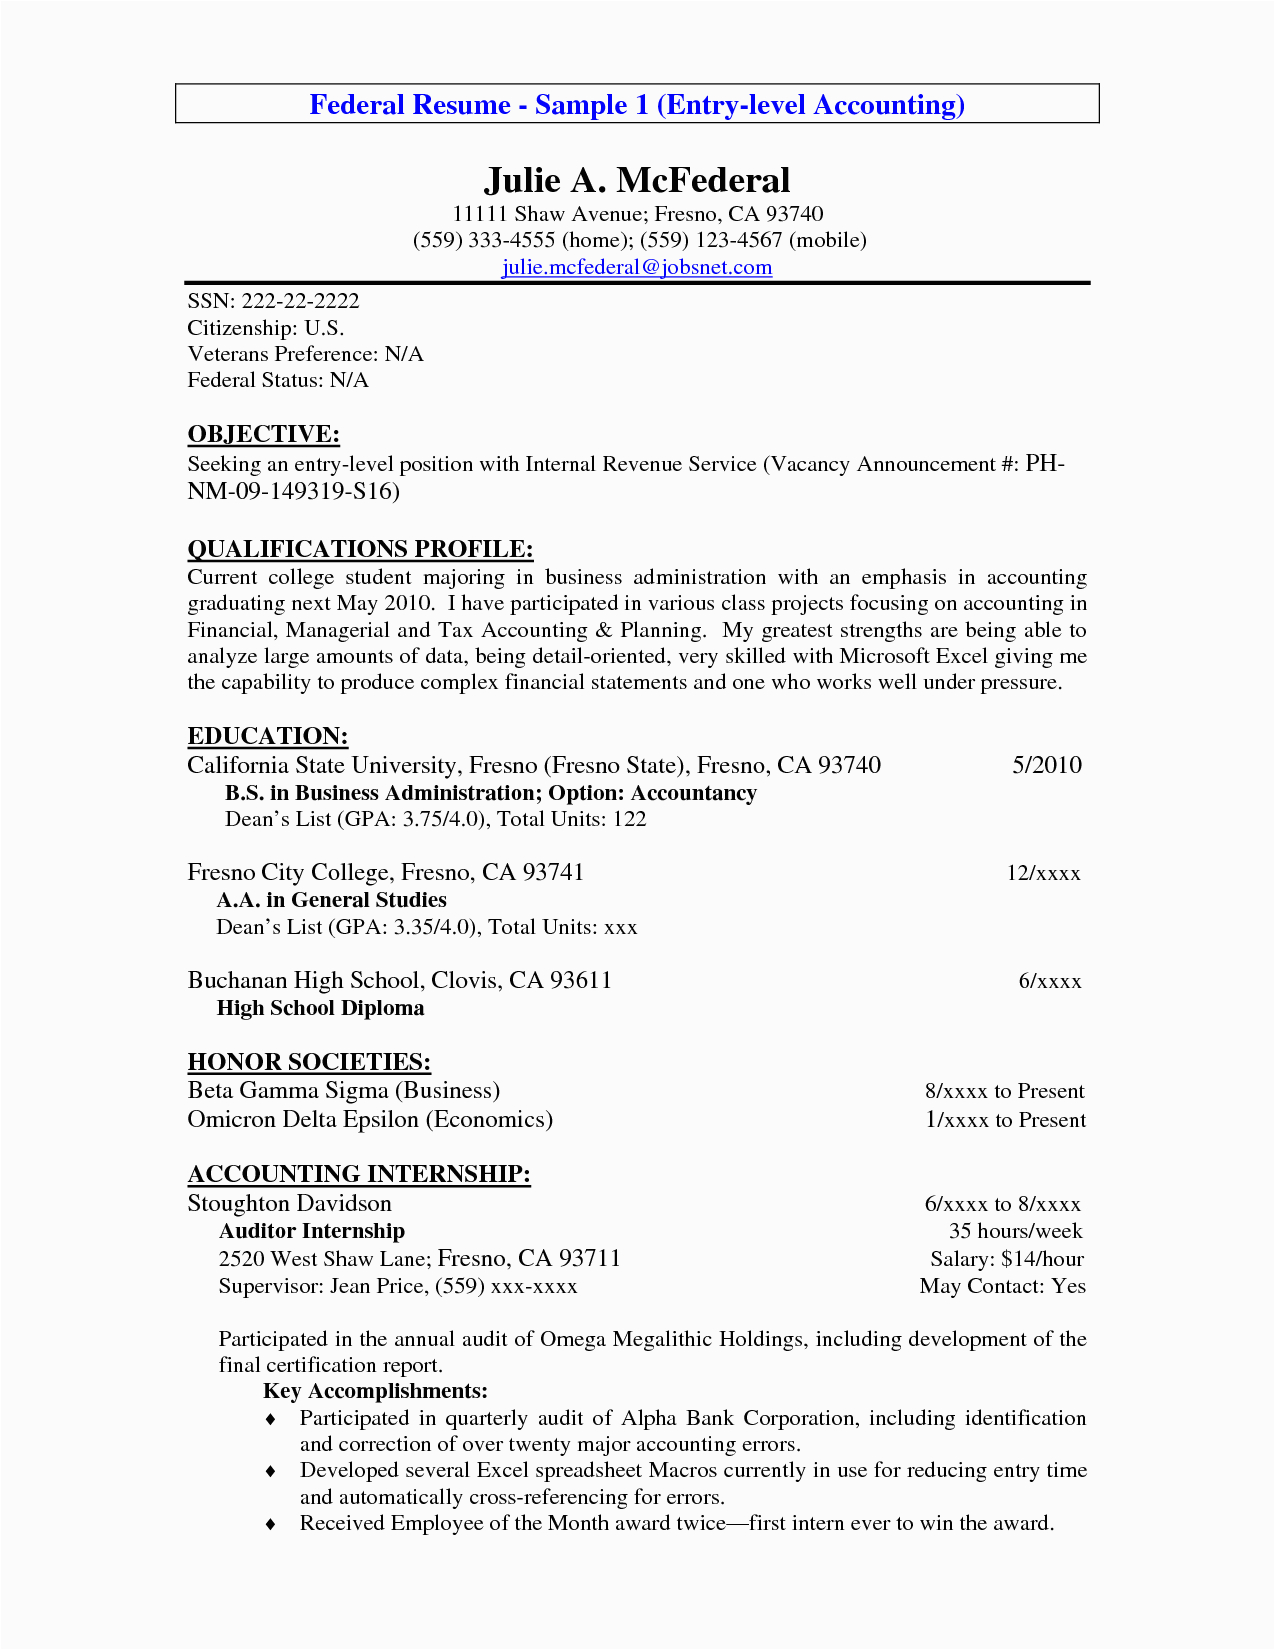 Sample Resumes for Entry Level Accounting Jobs Entry Level Accounting Resume Security Guards Panies